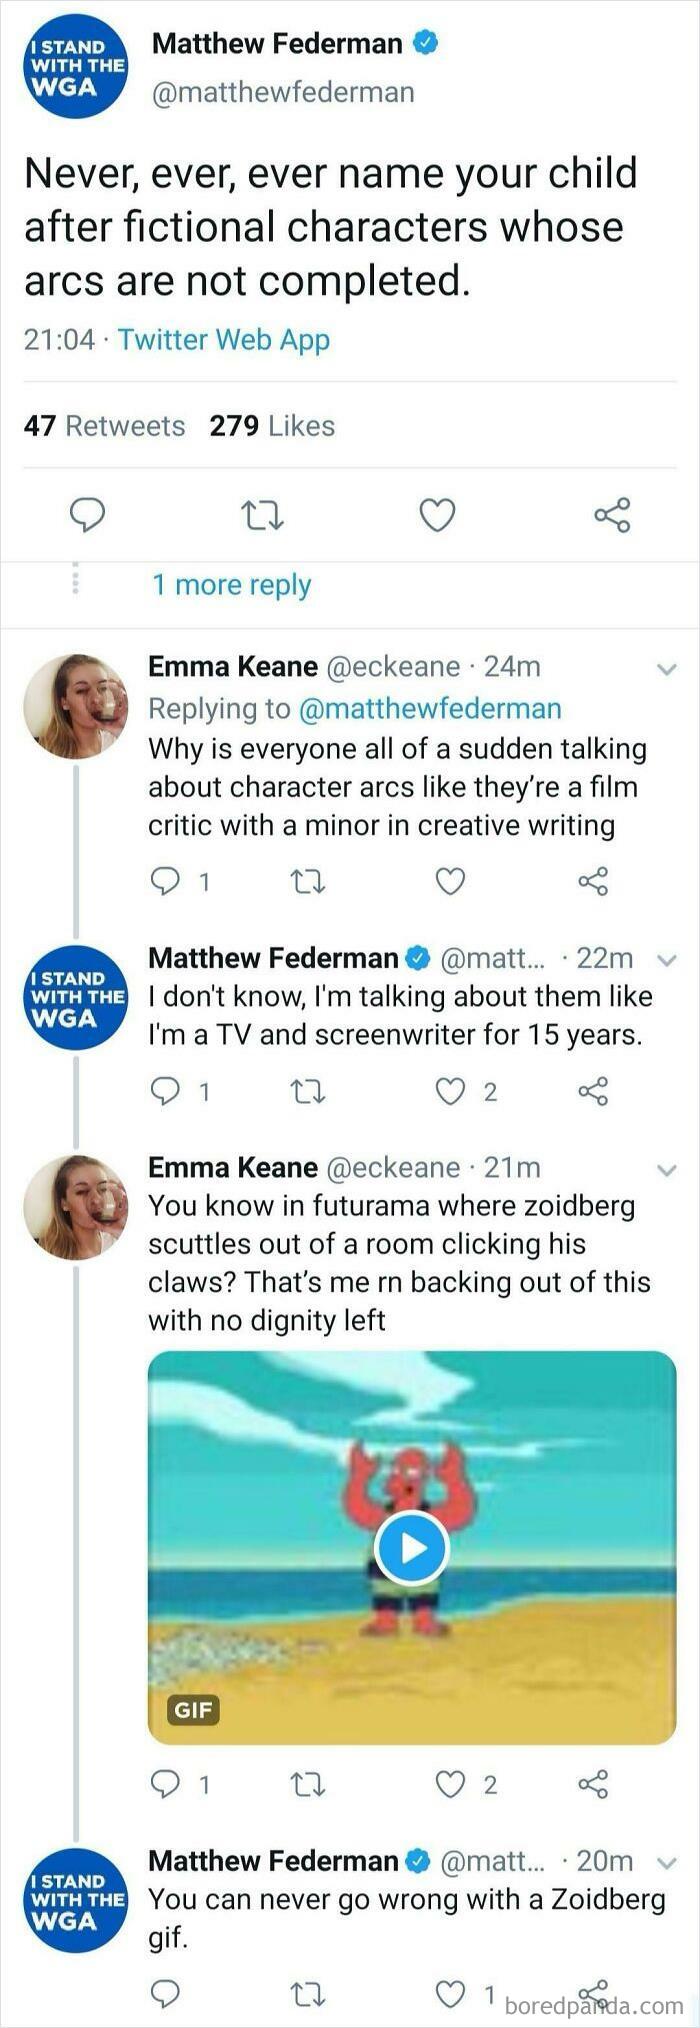 Wholesome Interaction. Most Writers/Accusers Should Be Chill Like This